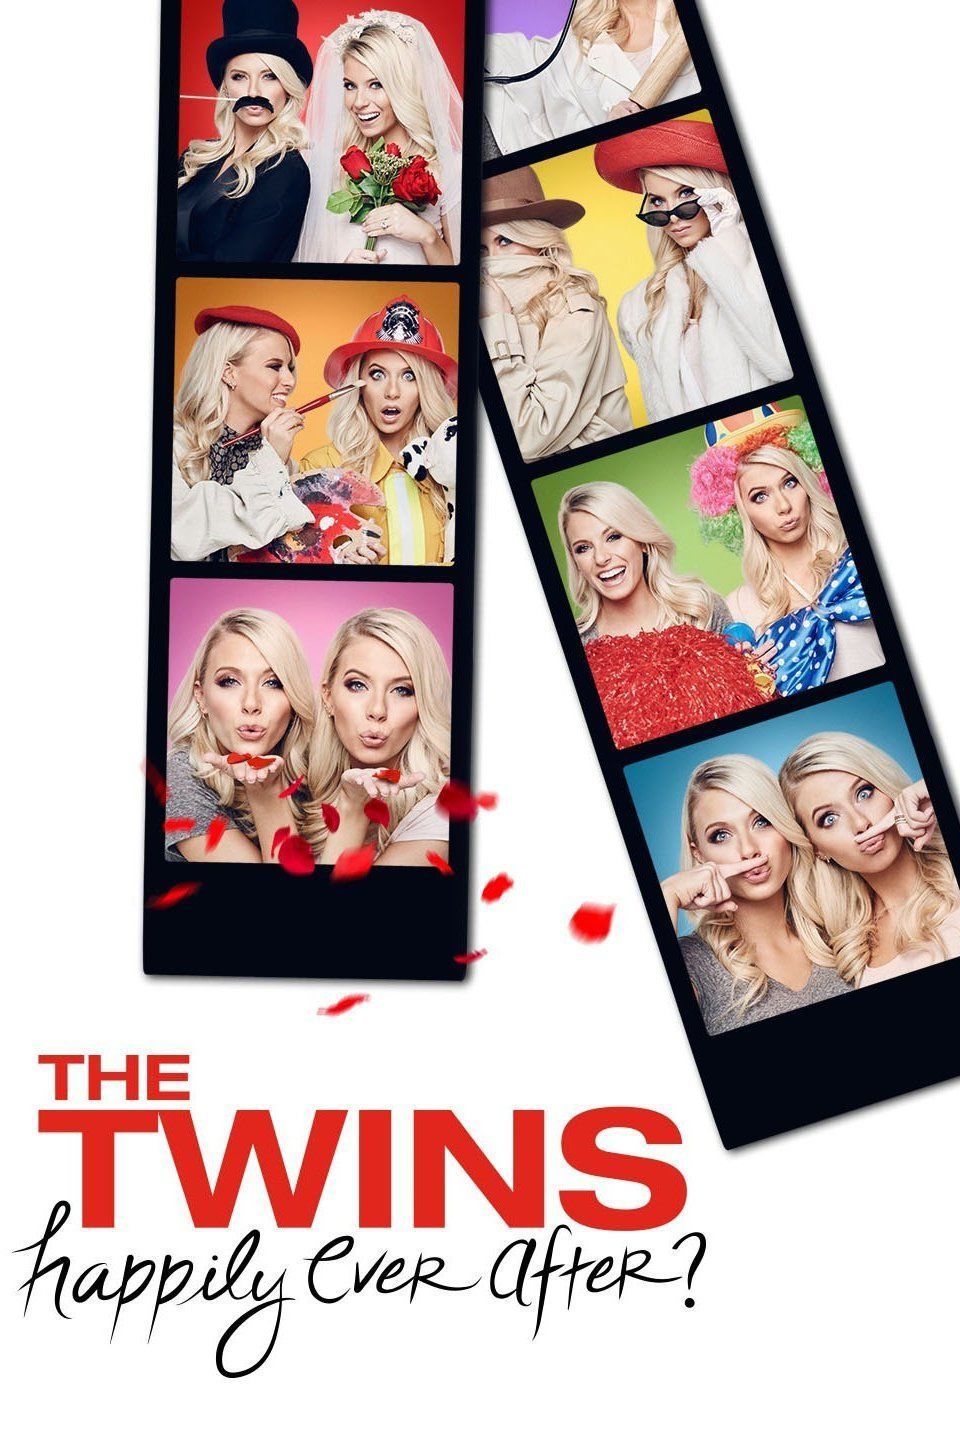 The Twins: Happily Ever After? ne zaman